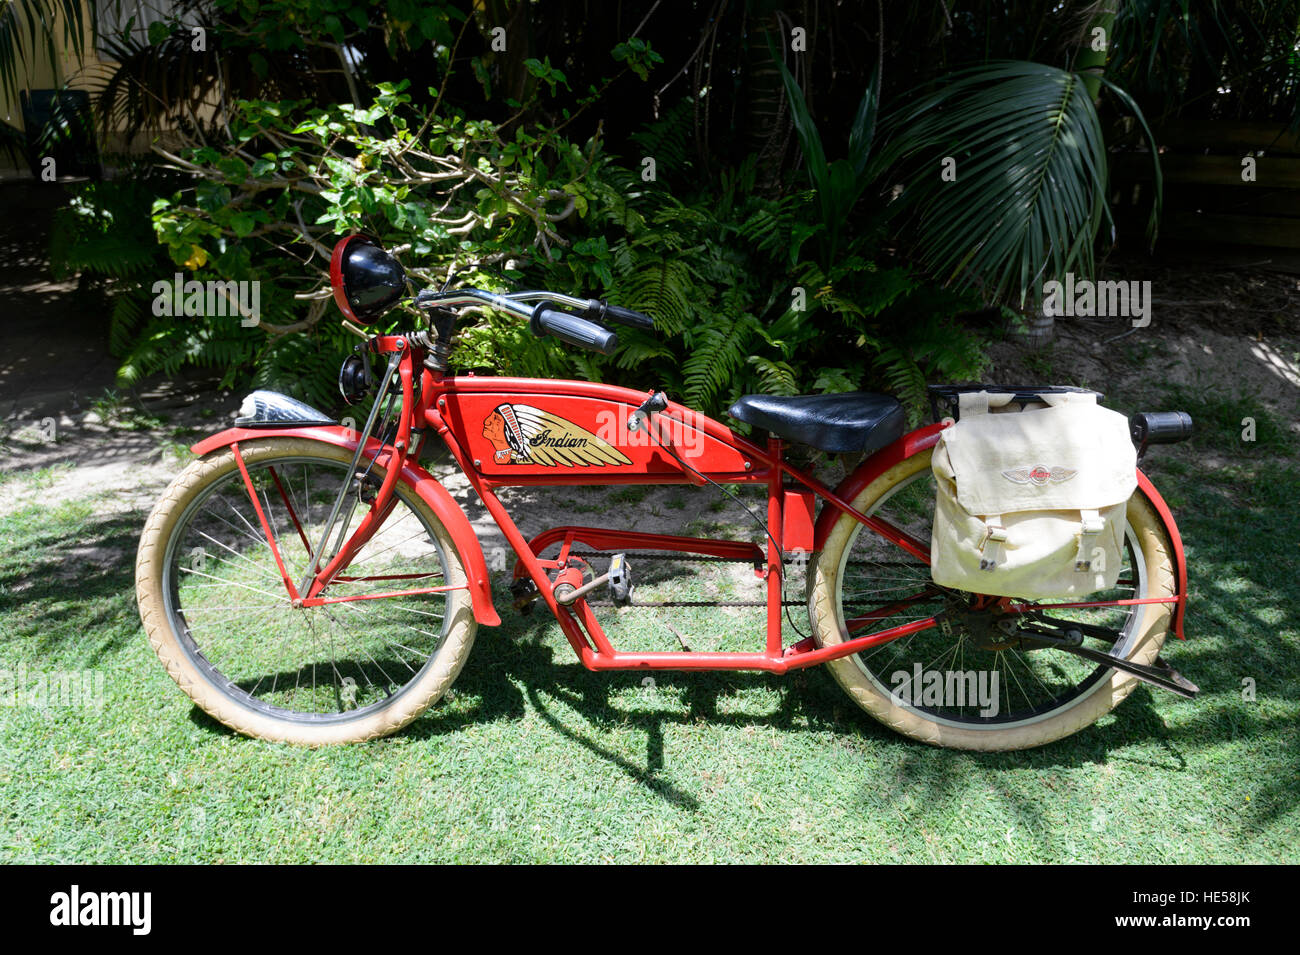 Fantasy-indische Fahrrad, Lord-Howe-Insel, New-South.Wales, Australien Stockfoto